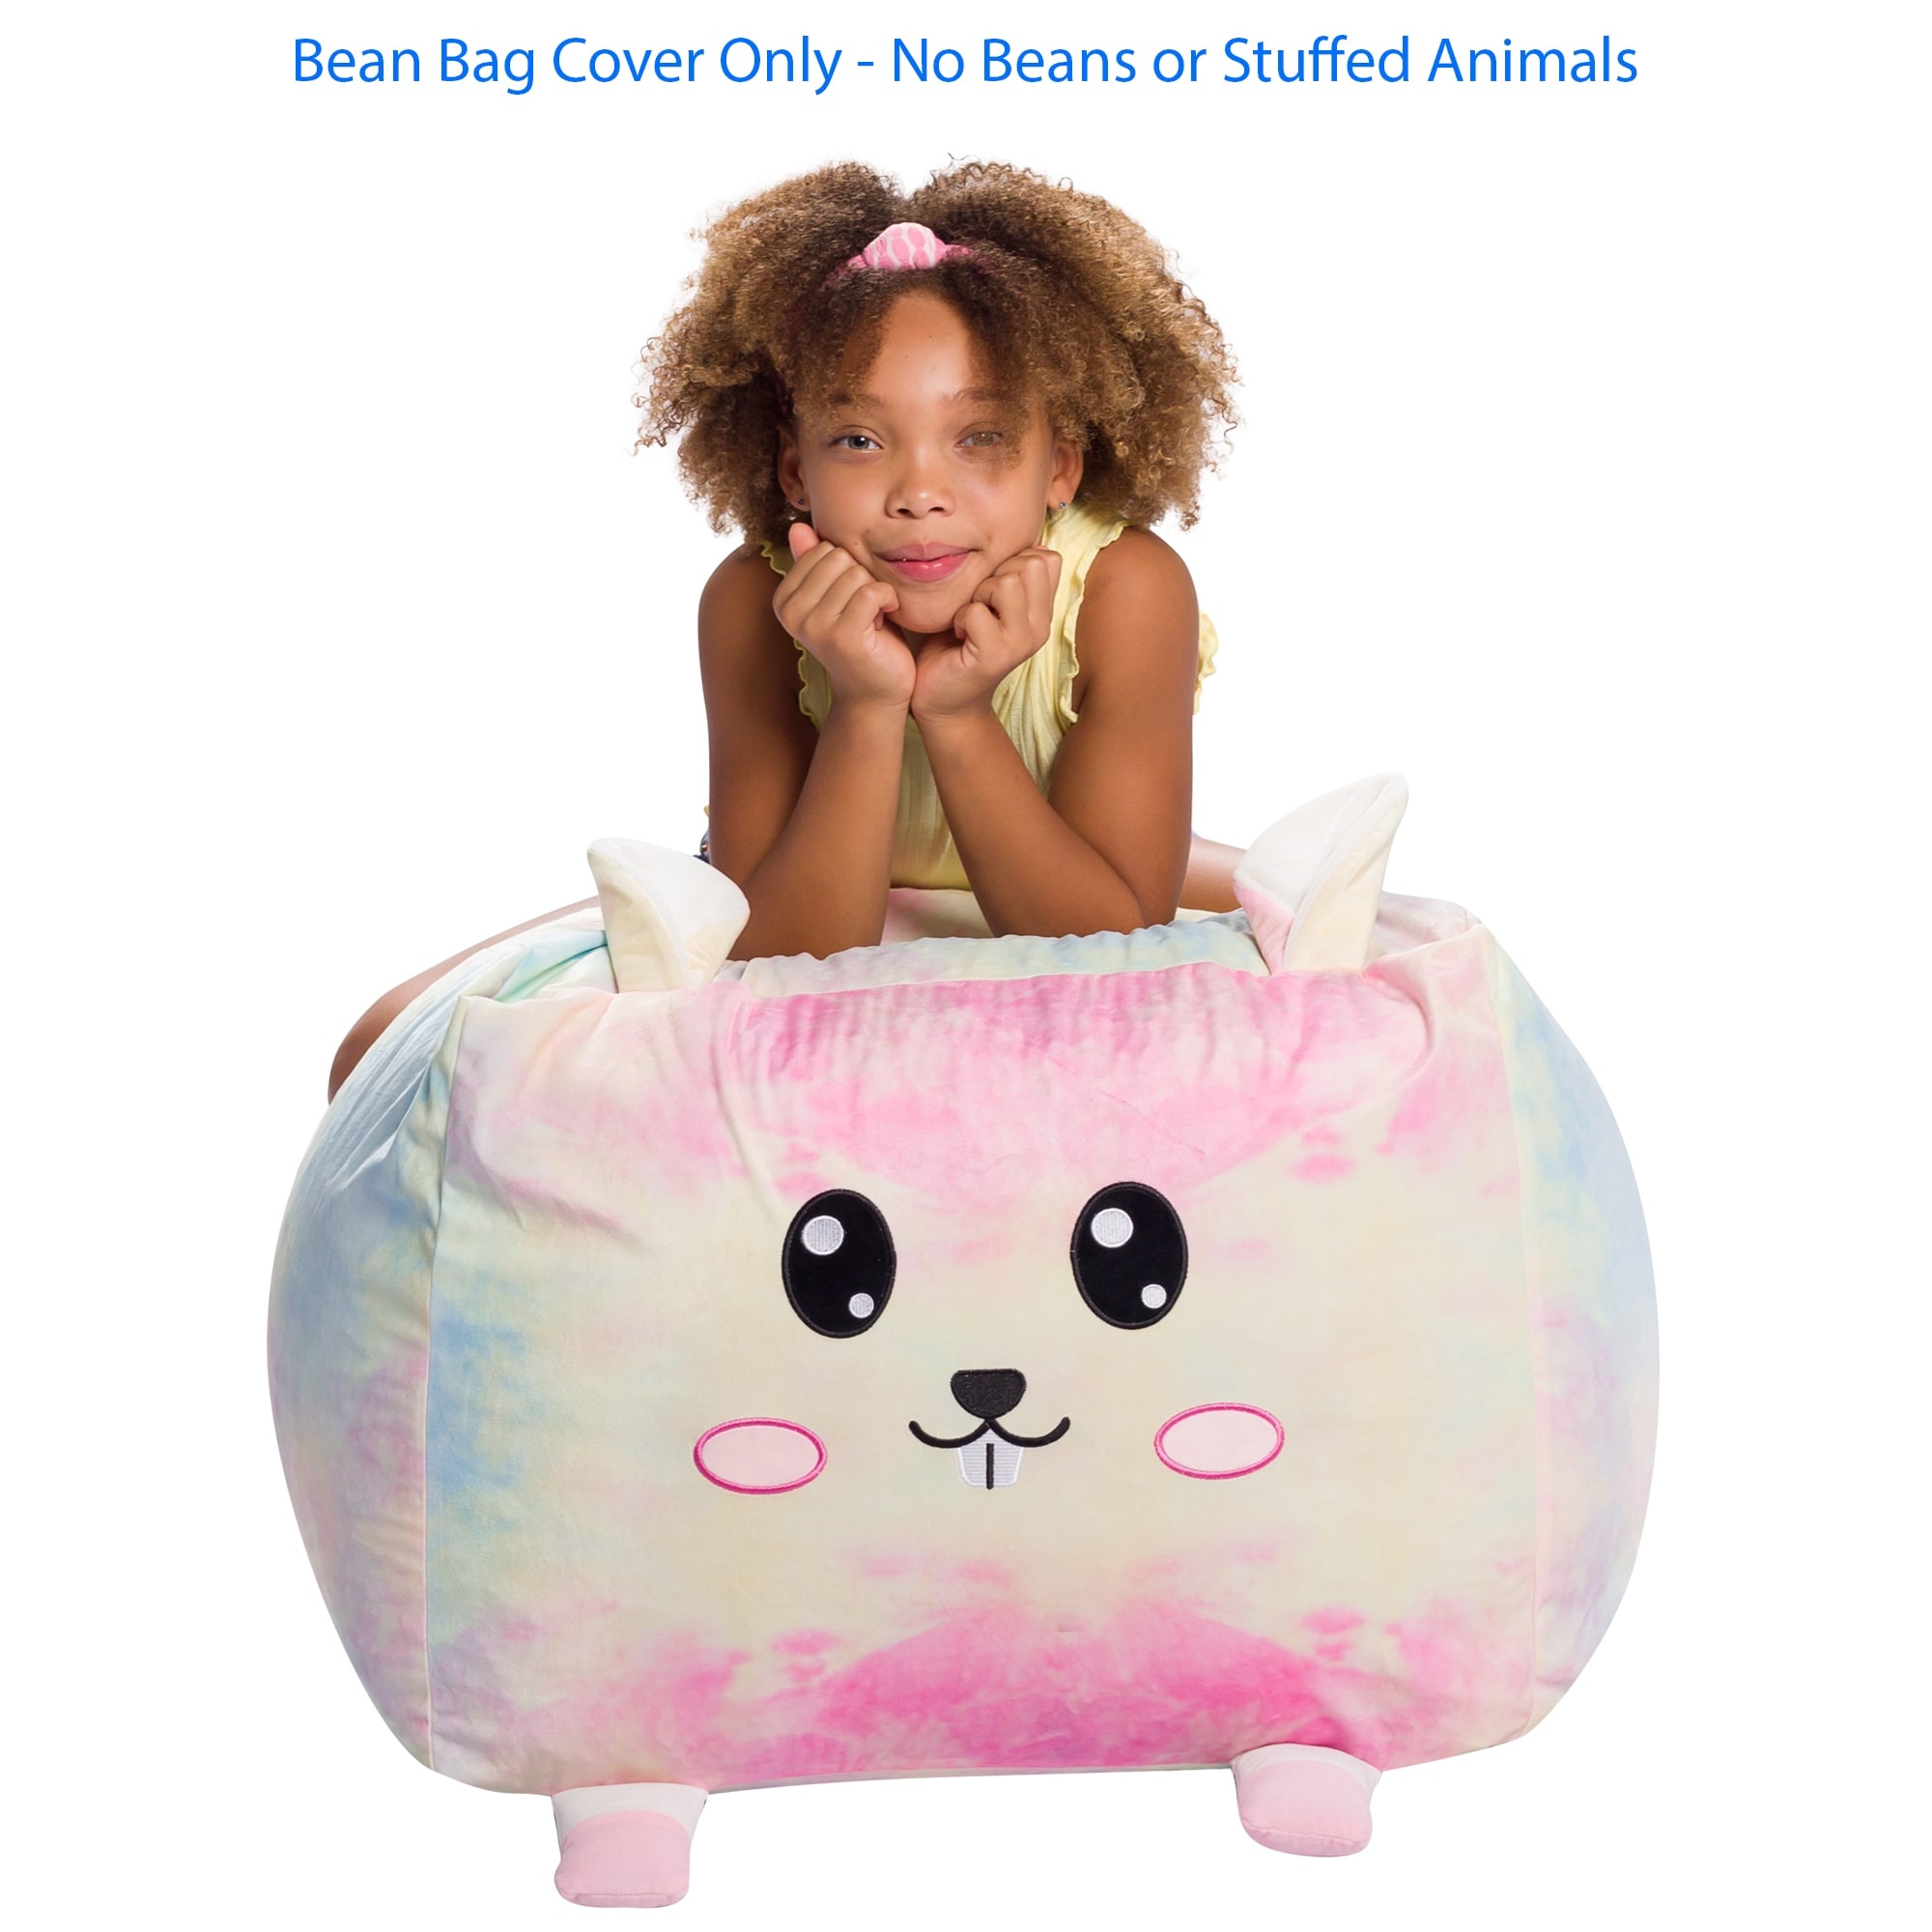 https://ak1.ostkcdn.com/images/products/is/images/direct/452b27ed15d1d06a3341d448069acda7a16347a0/Stuffed-Animal-Storage-Bean-Bag-Chair-for-Kids%2C-Toy-Holder-and-Organizer%2C-Bean-Bag-Cover.jpg